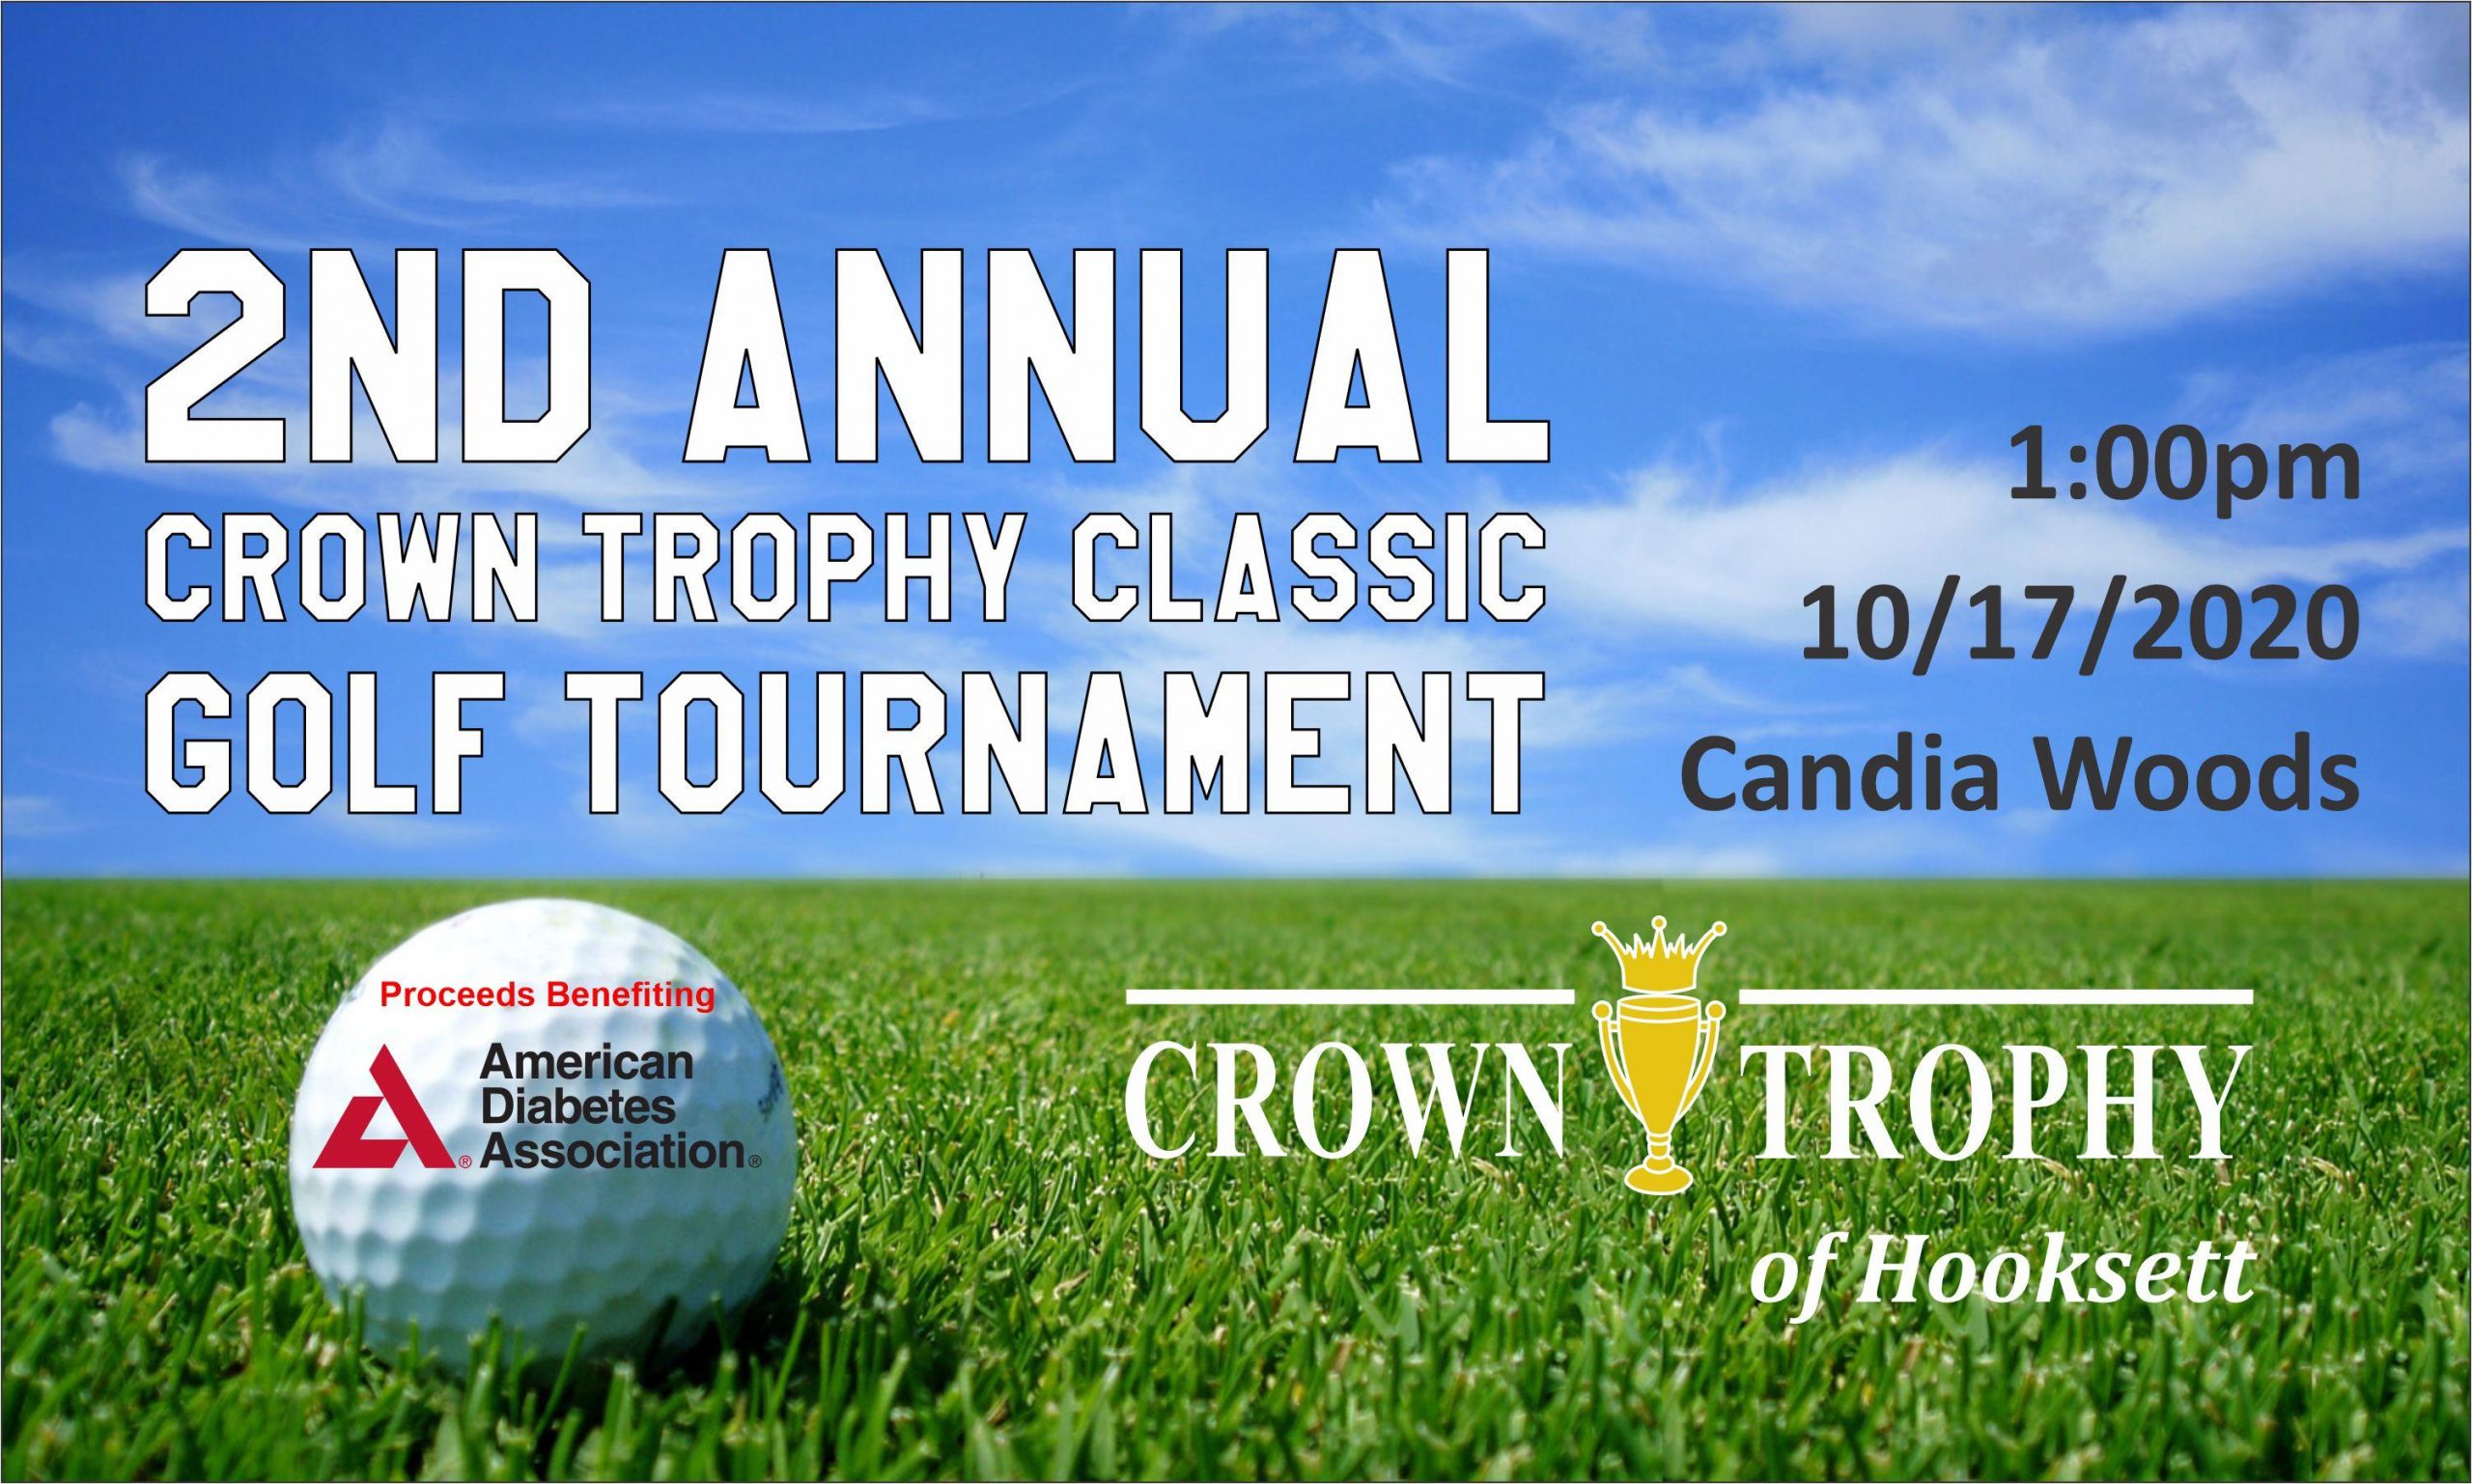 2nd Annual Crown Trophy Classic Golf Tournament